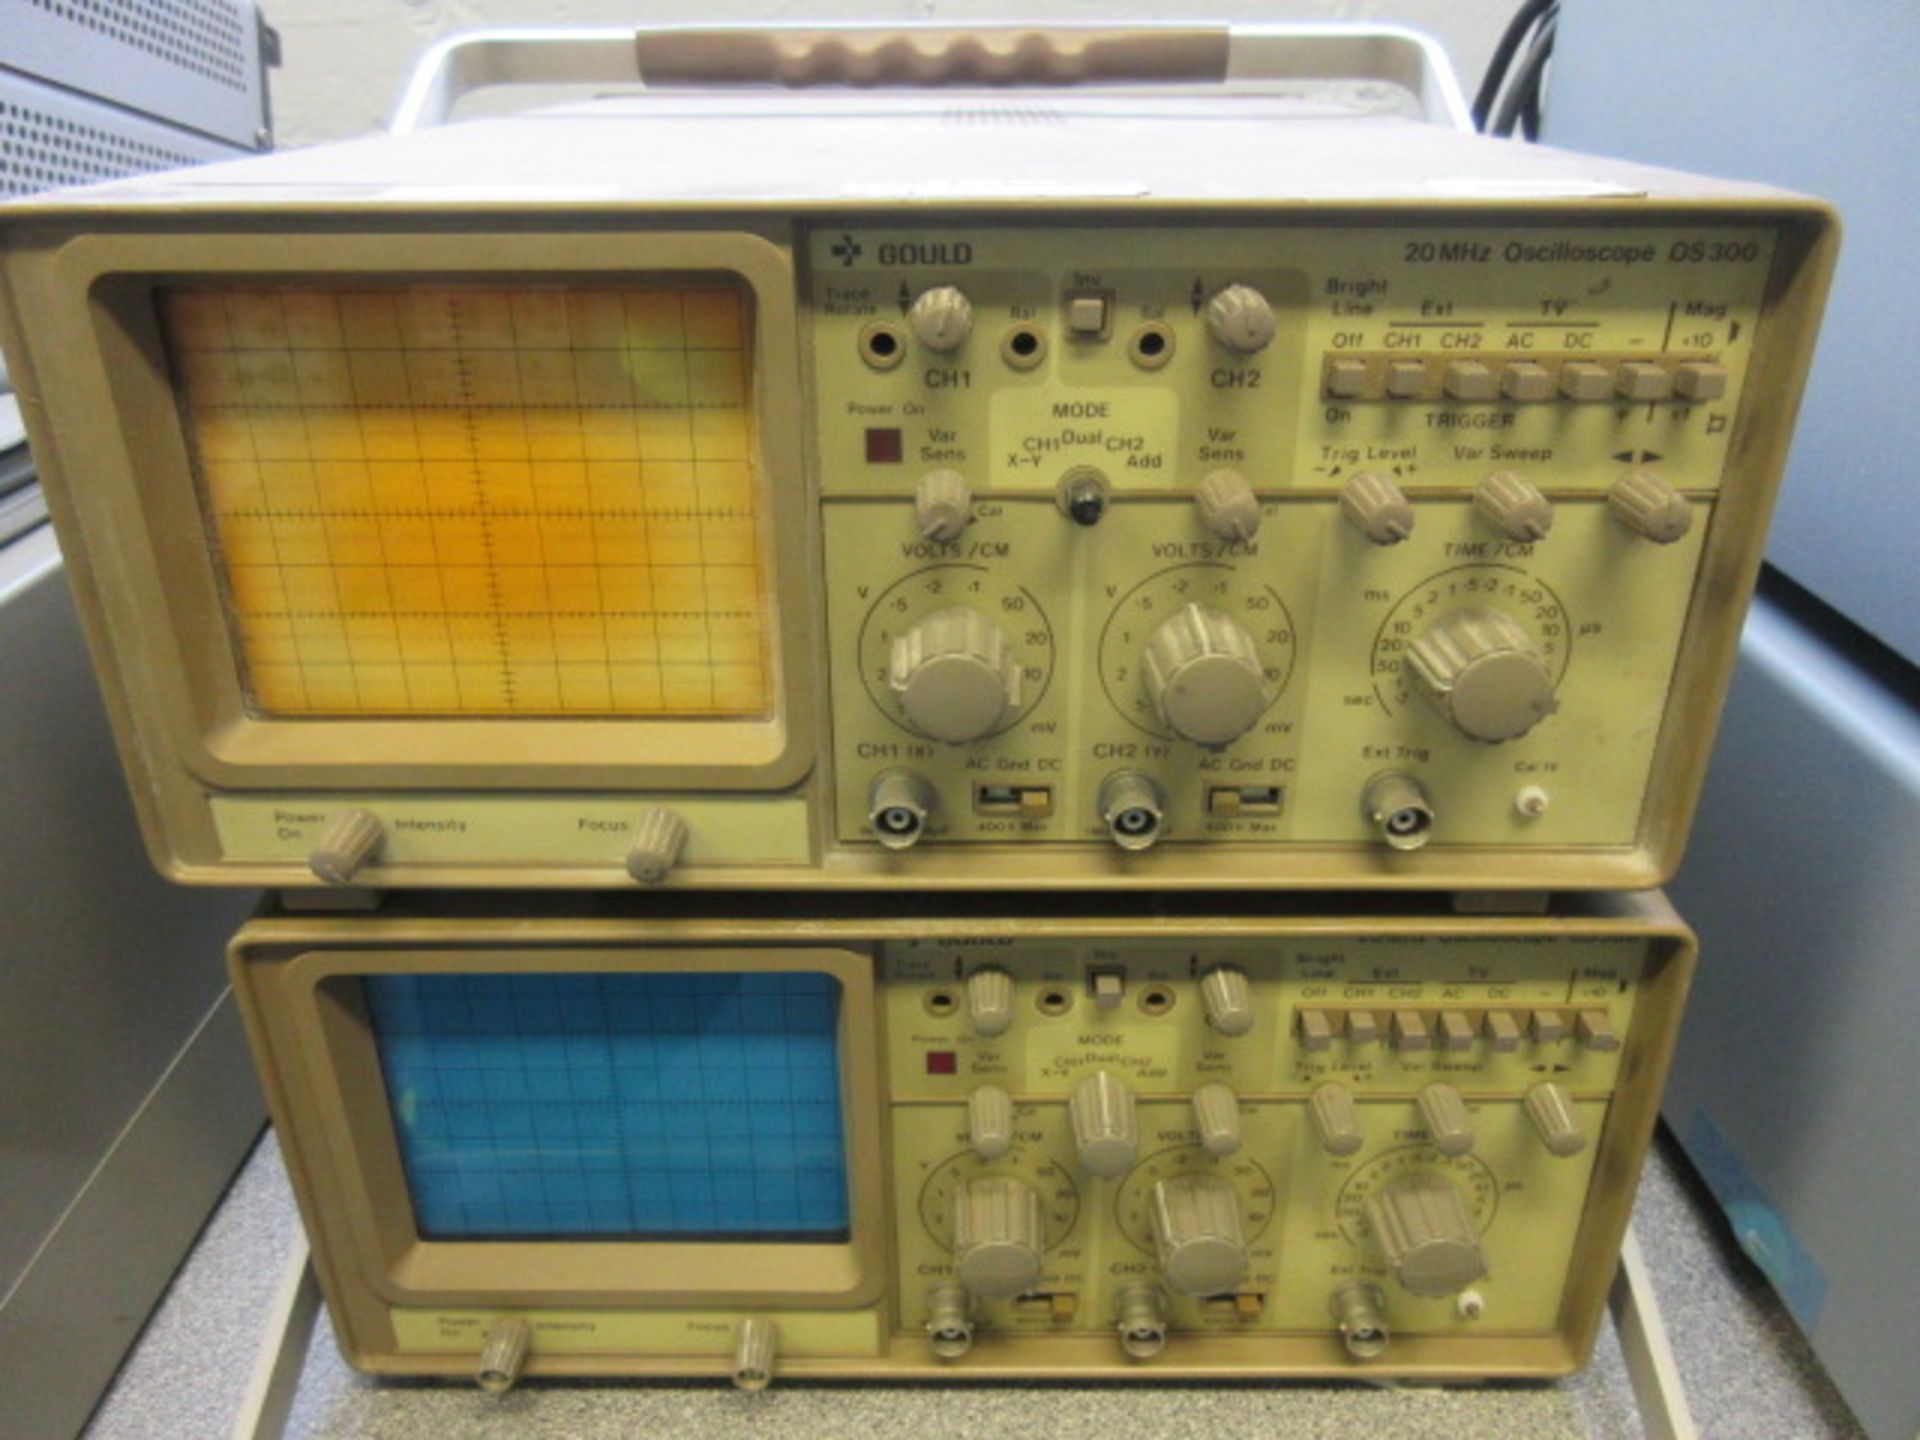 TWO GOULD 20 MHz 0S300 OSCILLOSCOPES